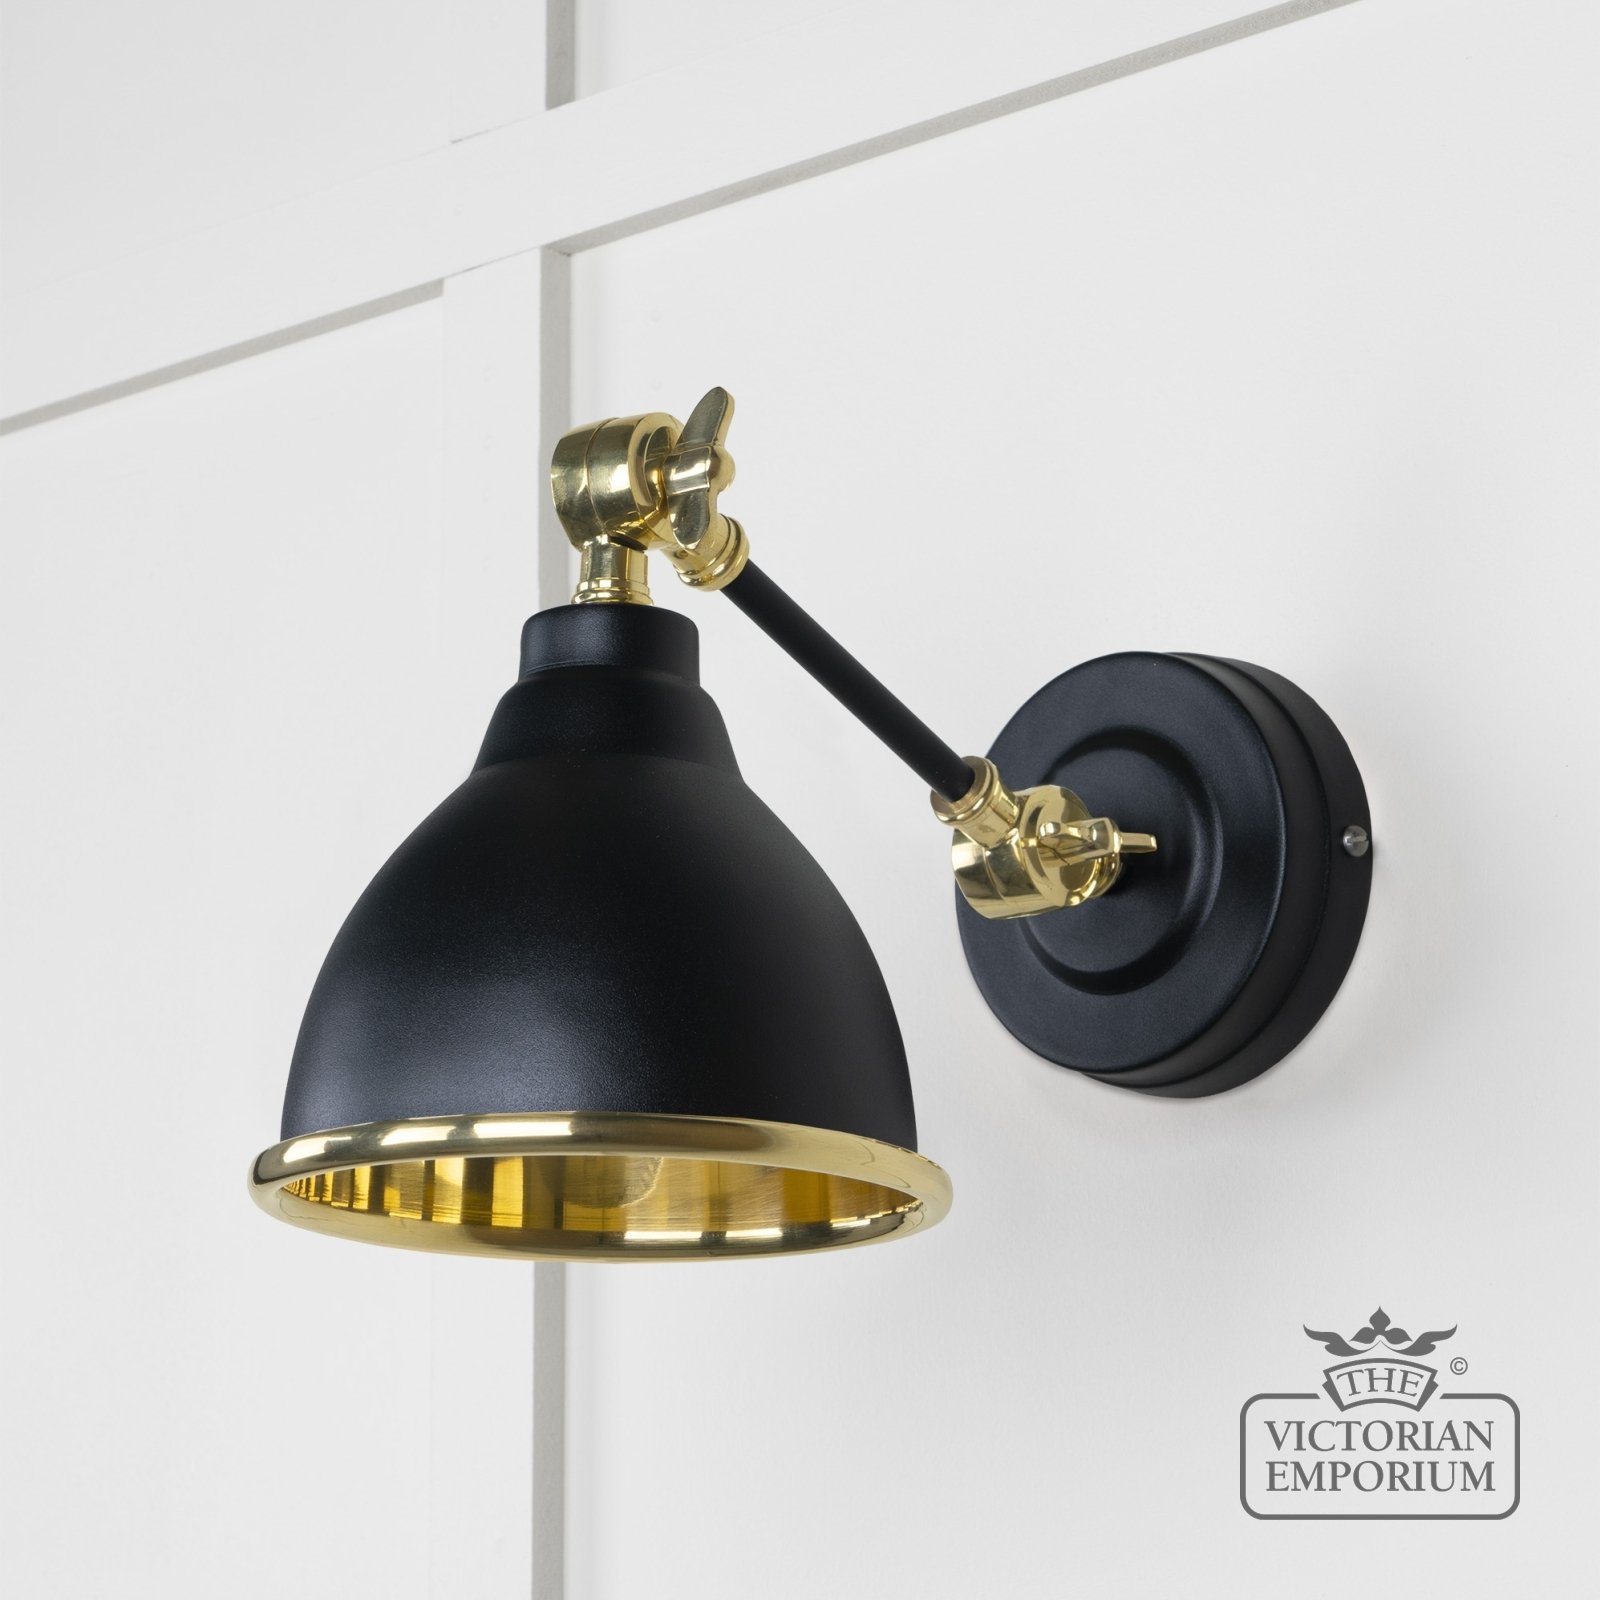 Brindle Wall Light with Smooth Brass Interior and Black Exterior